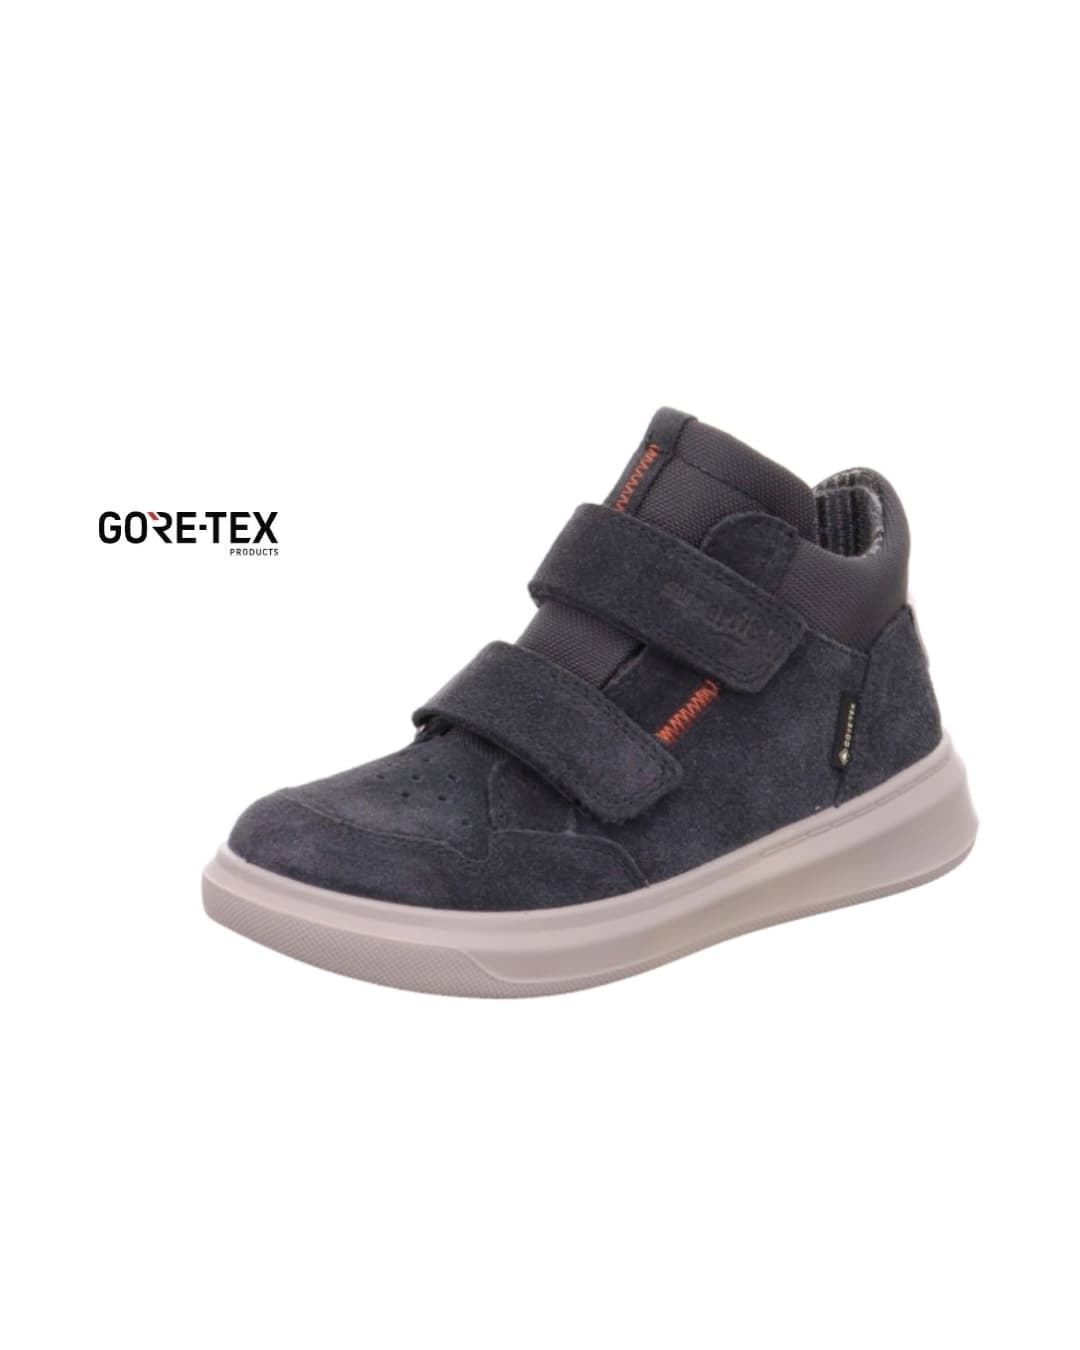 Superfit Gore-tex Boots for Kids Gray Suede - Image 1